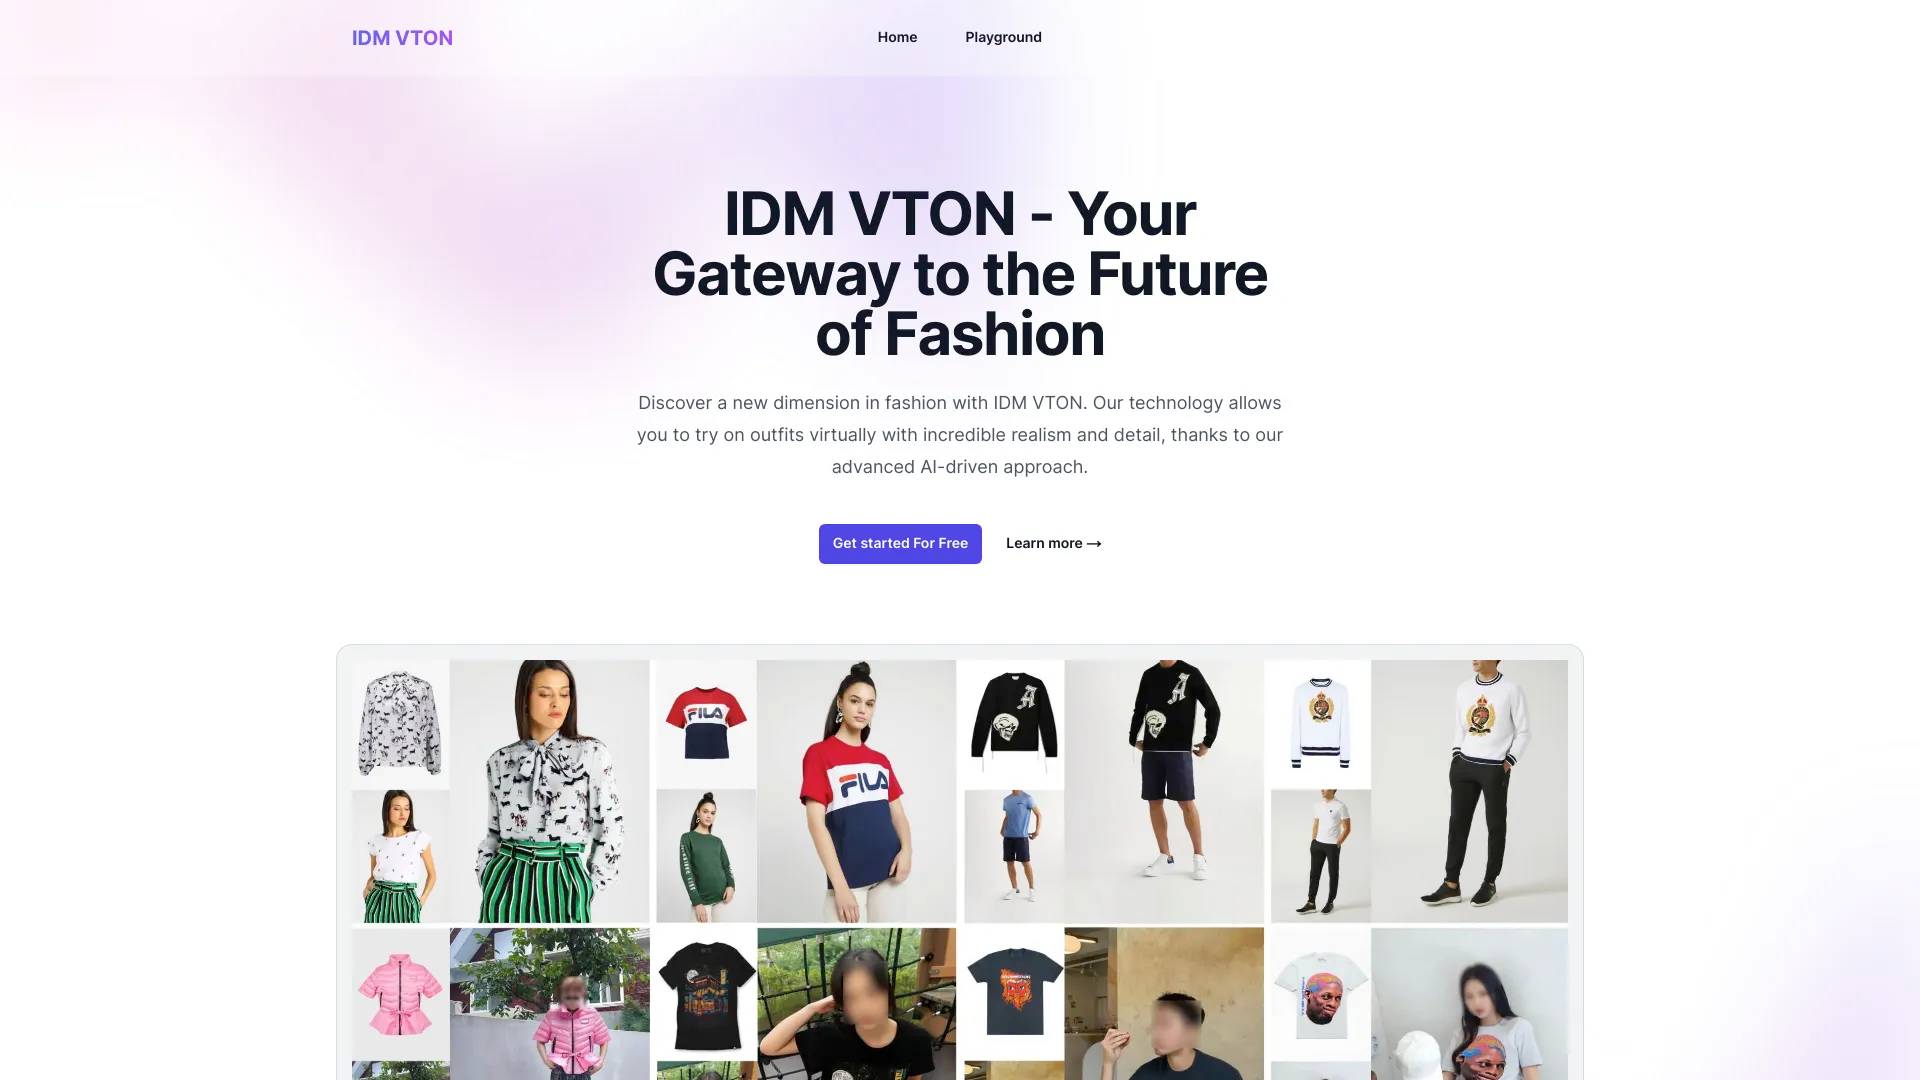 IDM VTON Online - Free Online Access for Virtual Try-Ons screenshot